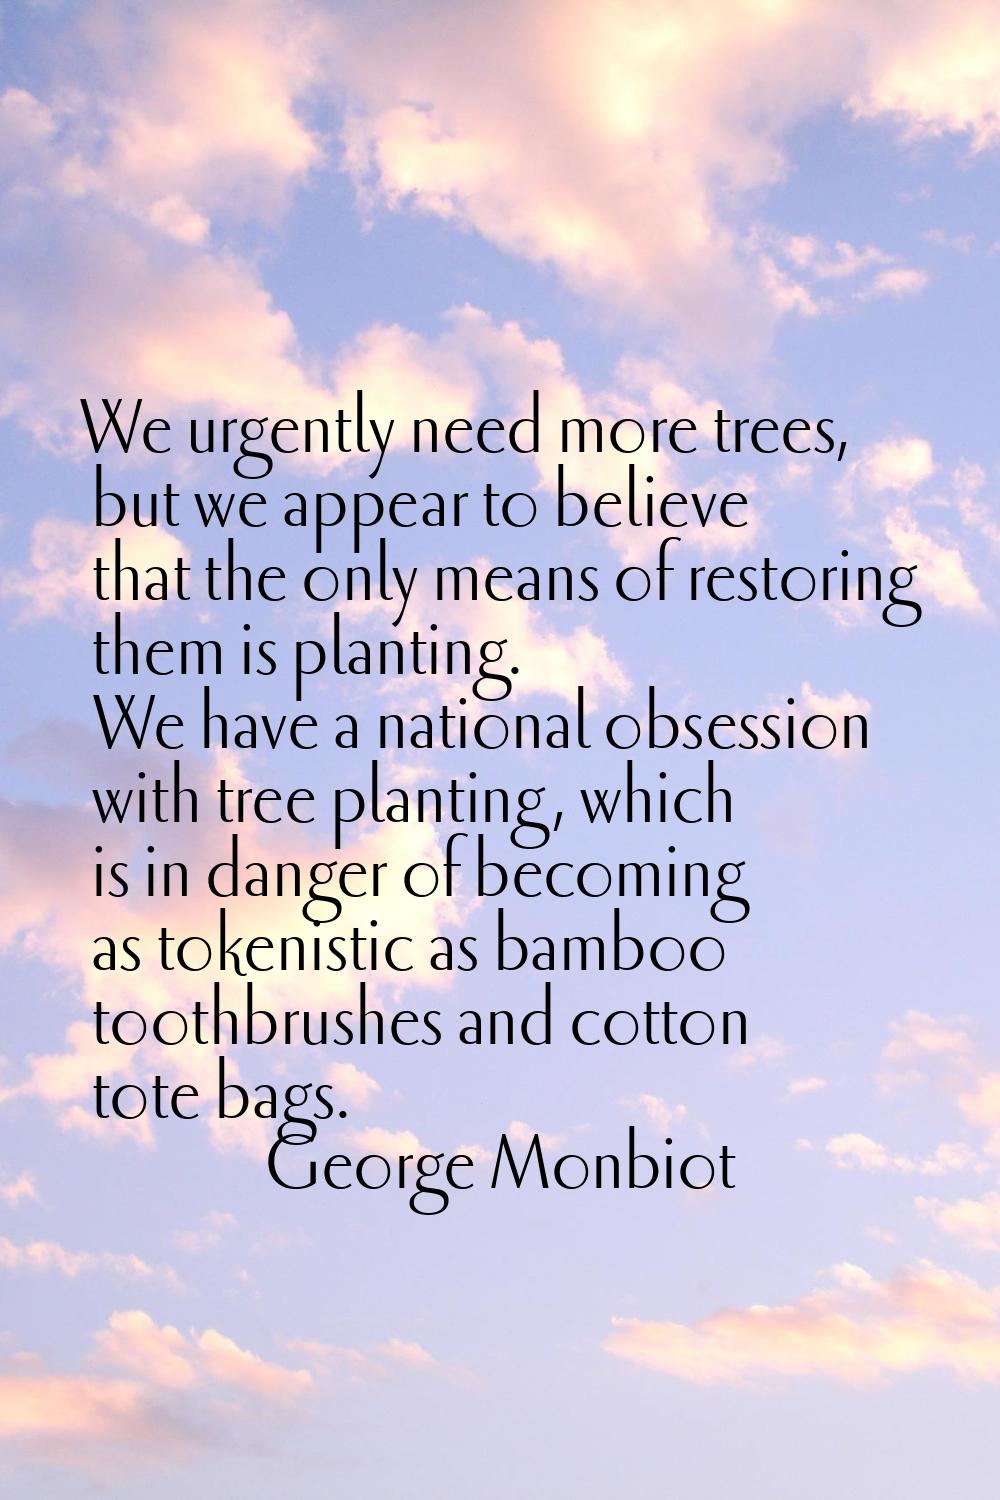 We urgently need more trees, but we appear to believe that the only means of restoring them is plan